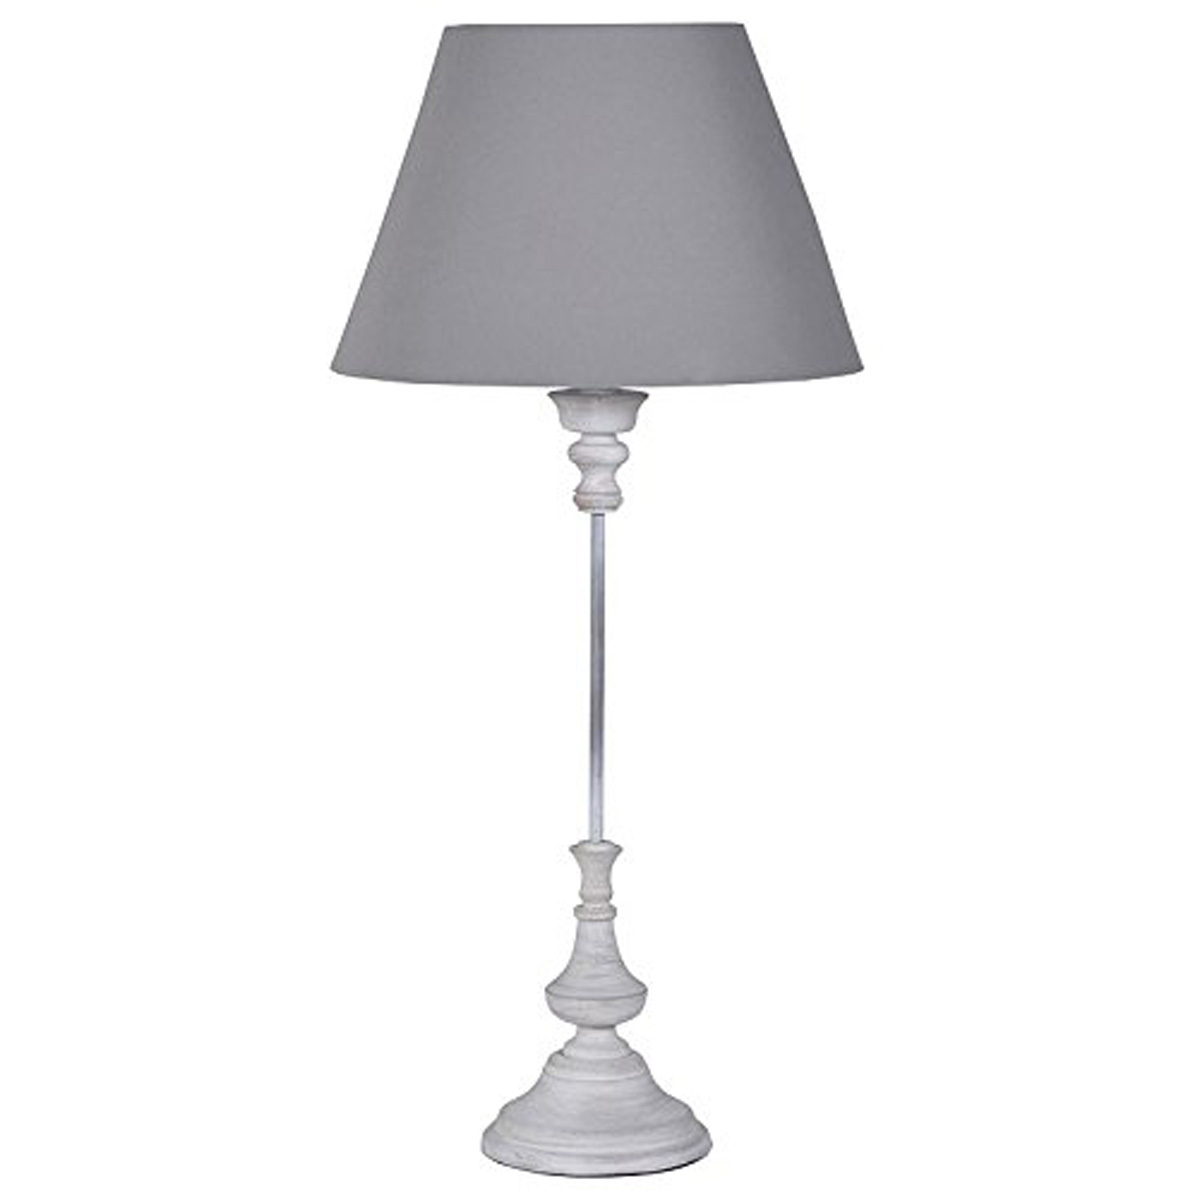 Tall Elegant Grey Table Lamp Interior, Tall Thin Silver Table Lamps Living Room